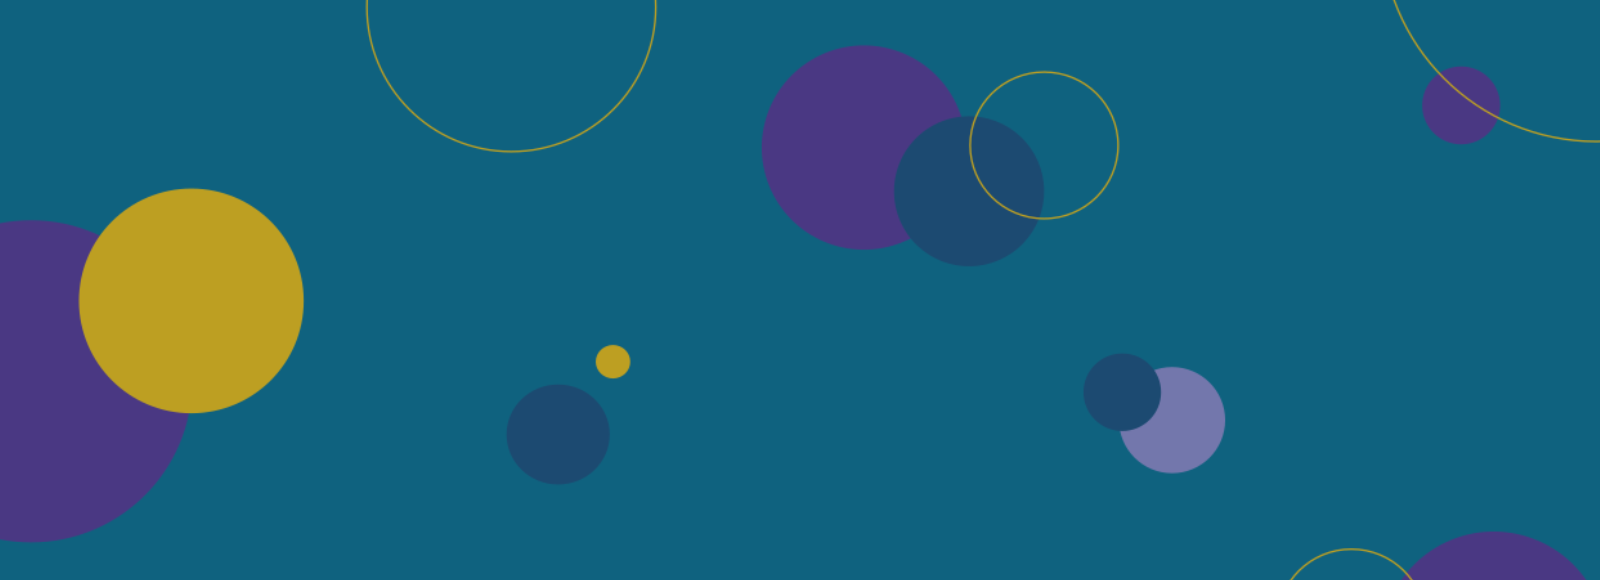 teal background with purple, blue, yellow circles